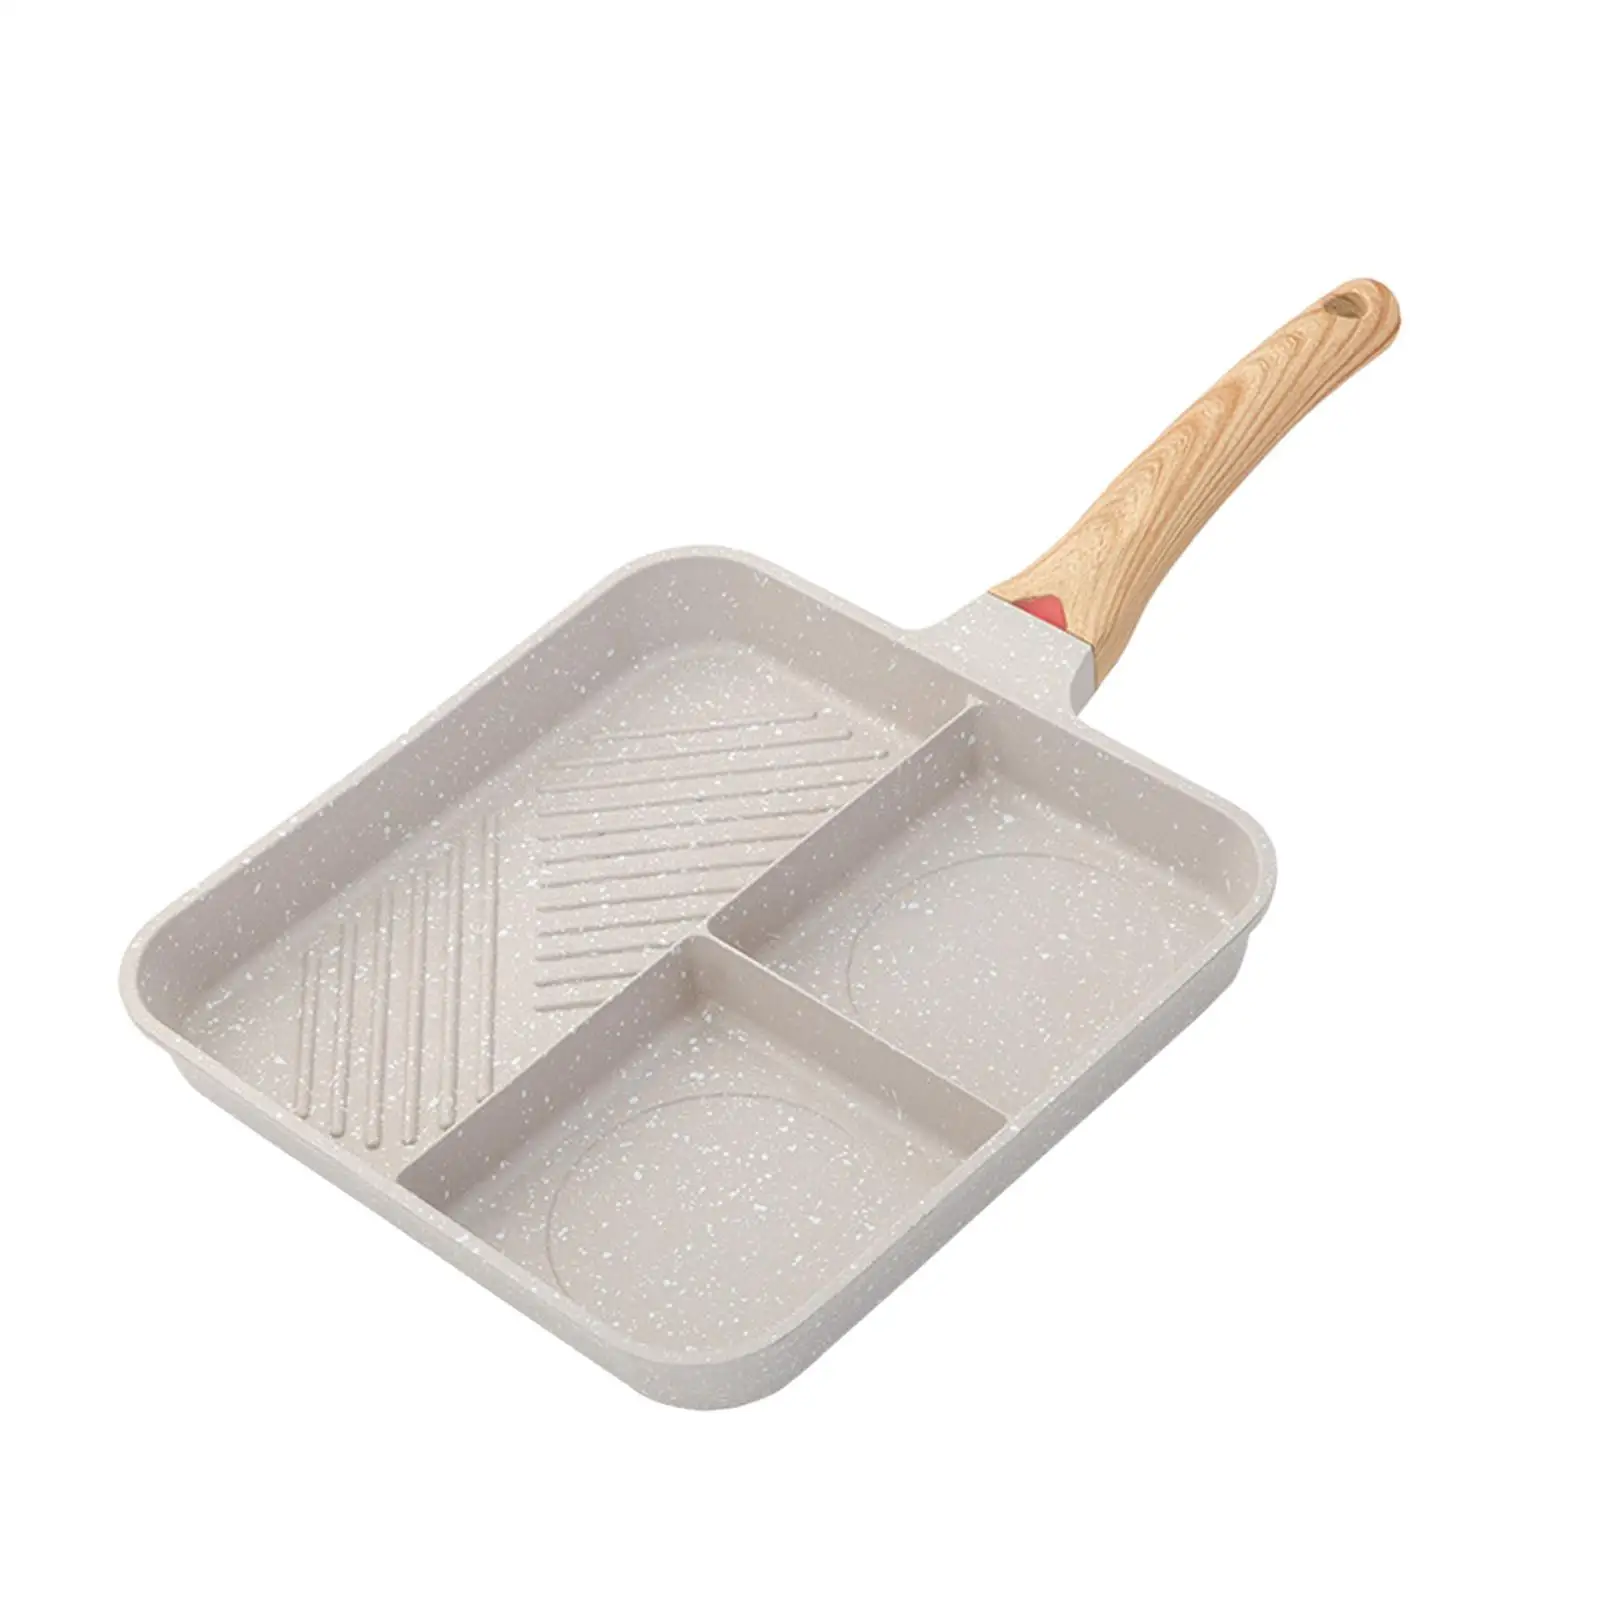 Frying Pot Square Grilling Pan Omelette Pot Non Stick for Travel Picnic Home